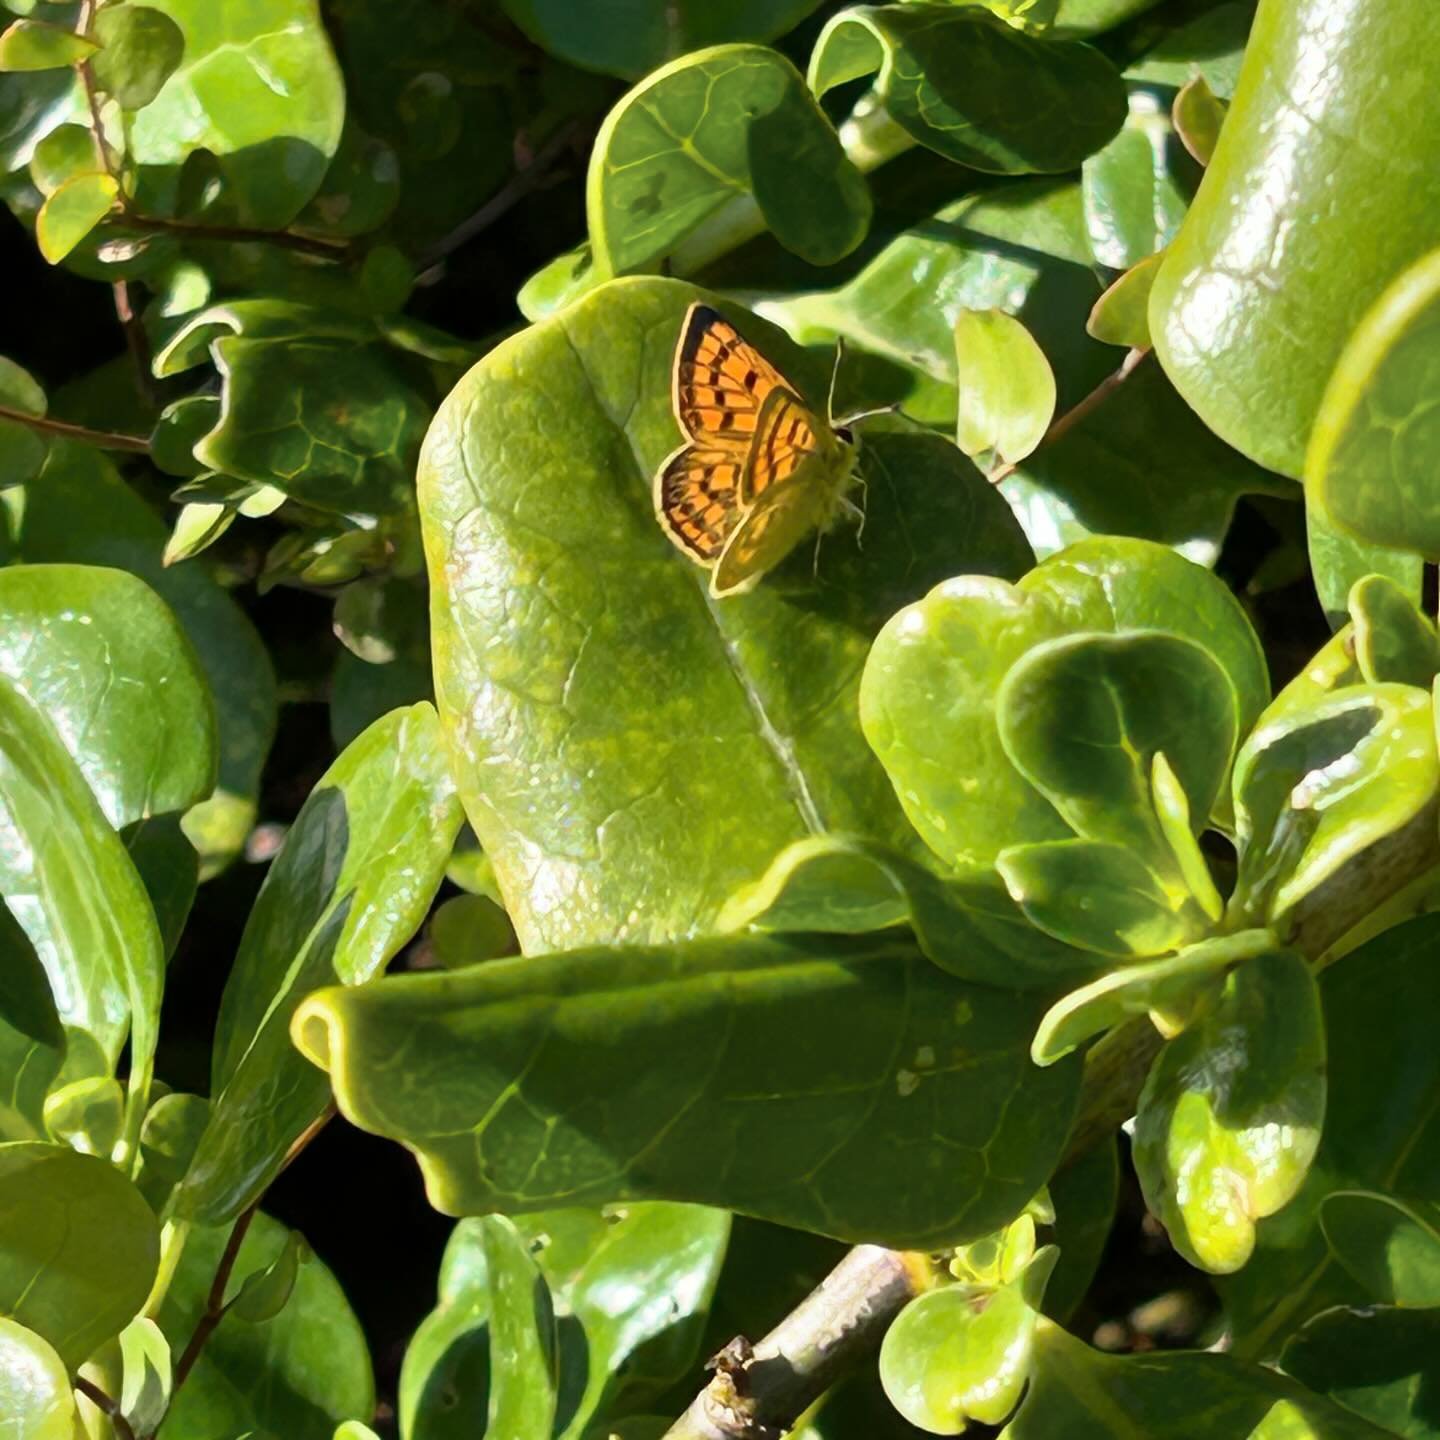 I took part in the iNaturalist City Nature Challenge on the weekend. The numerous Maui Copper butterflies along the coast were a highlight I was able to capture with my phone camera. #inaturalist #citynaturechallenge2024 #nzbutterflies #mothsandbutte